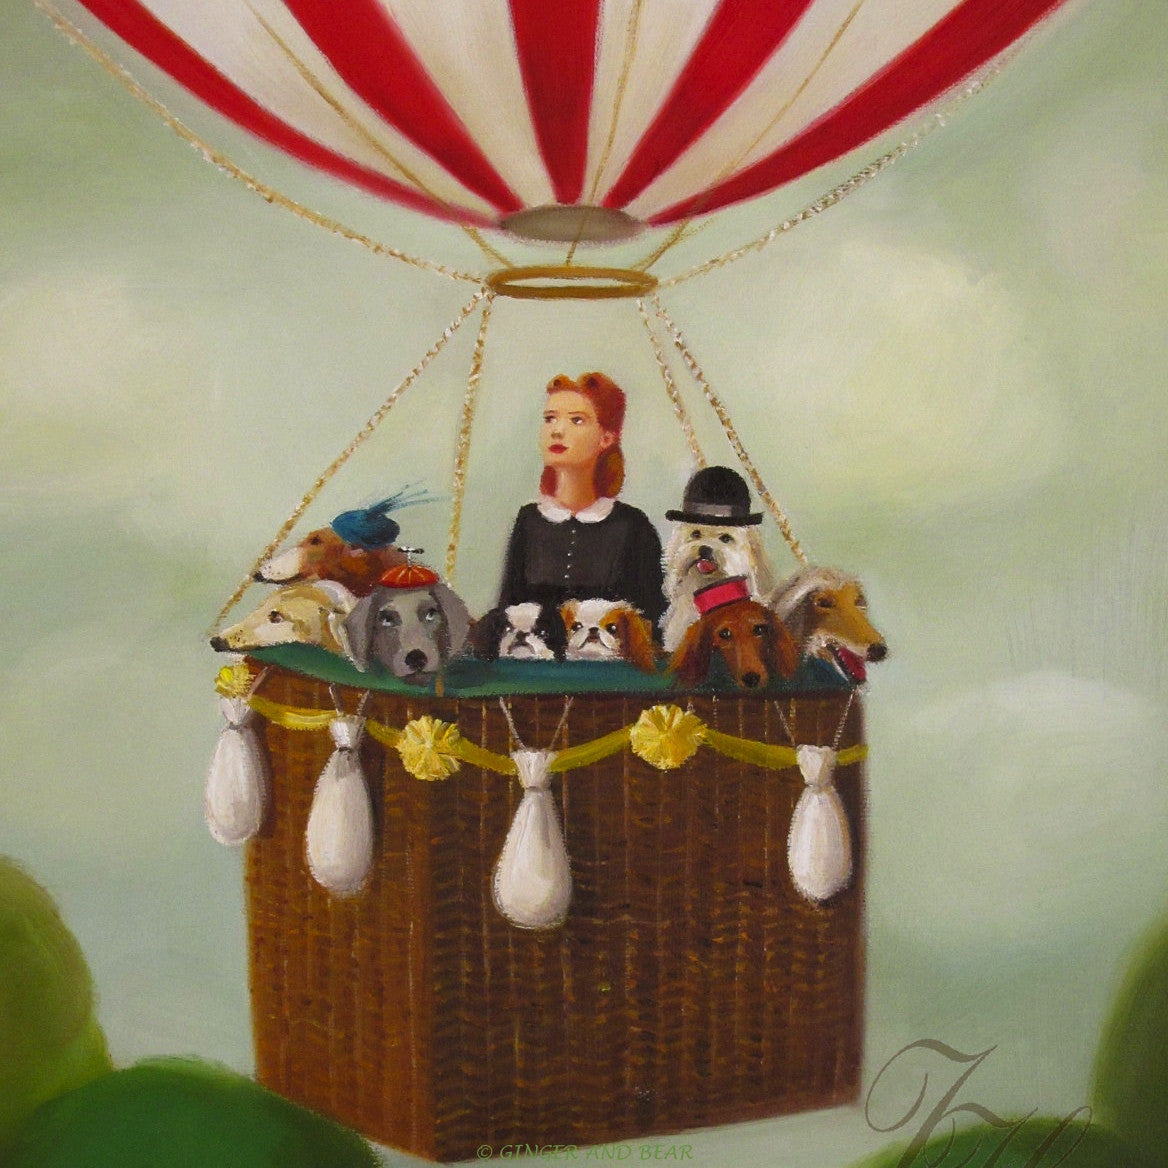 Art print, Miss Moon Was A Dog Governess. Lesson Two: Always Be True To Your Adventurous Spirit.